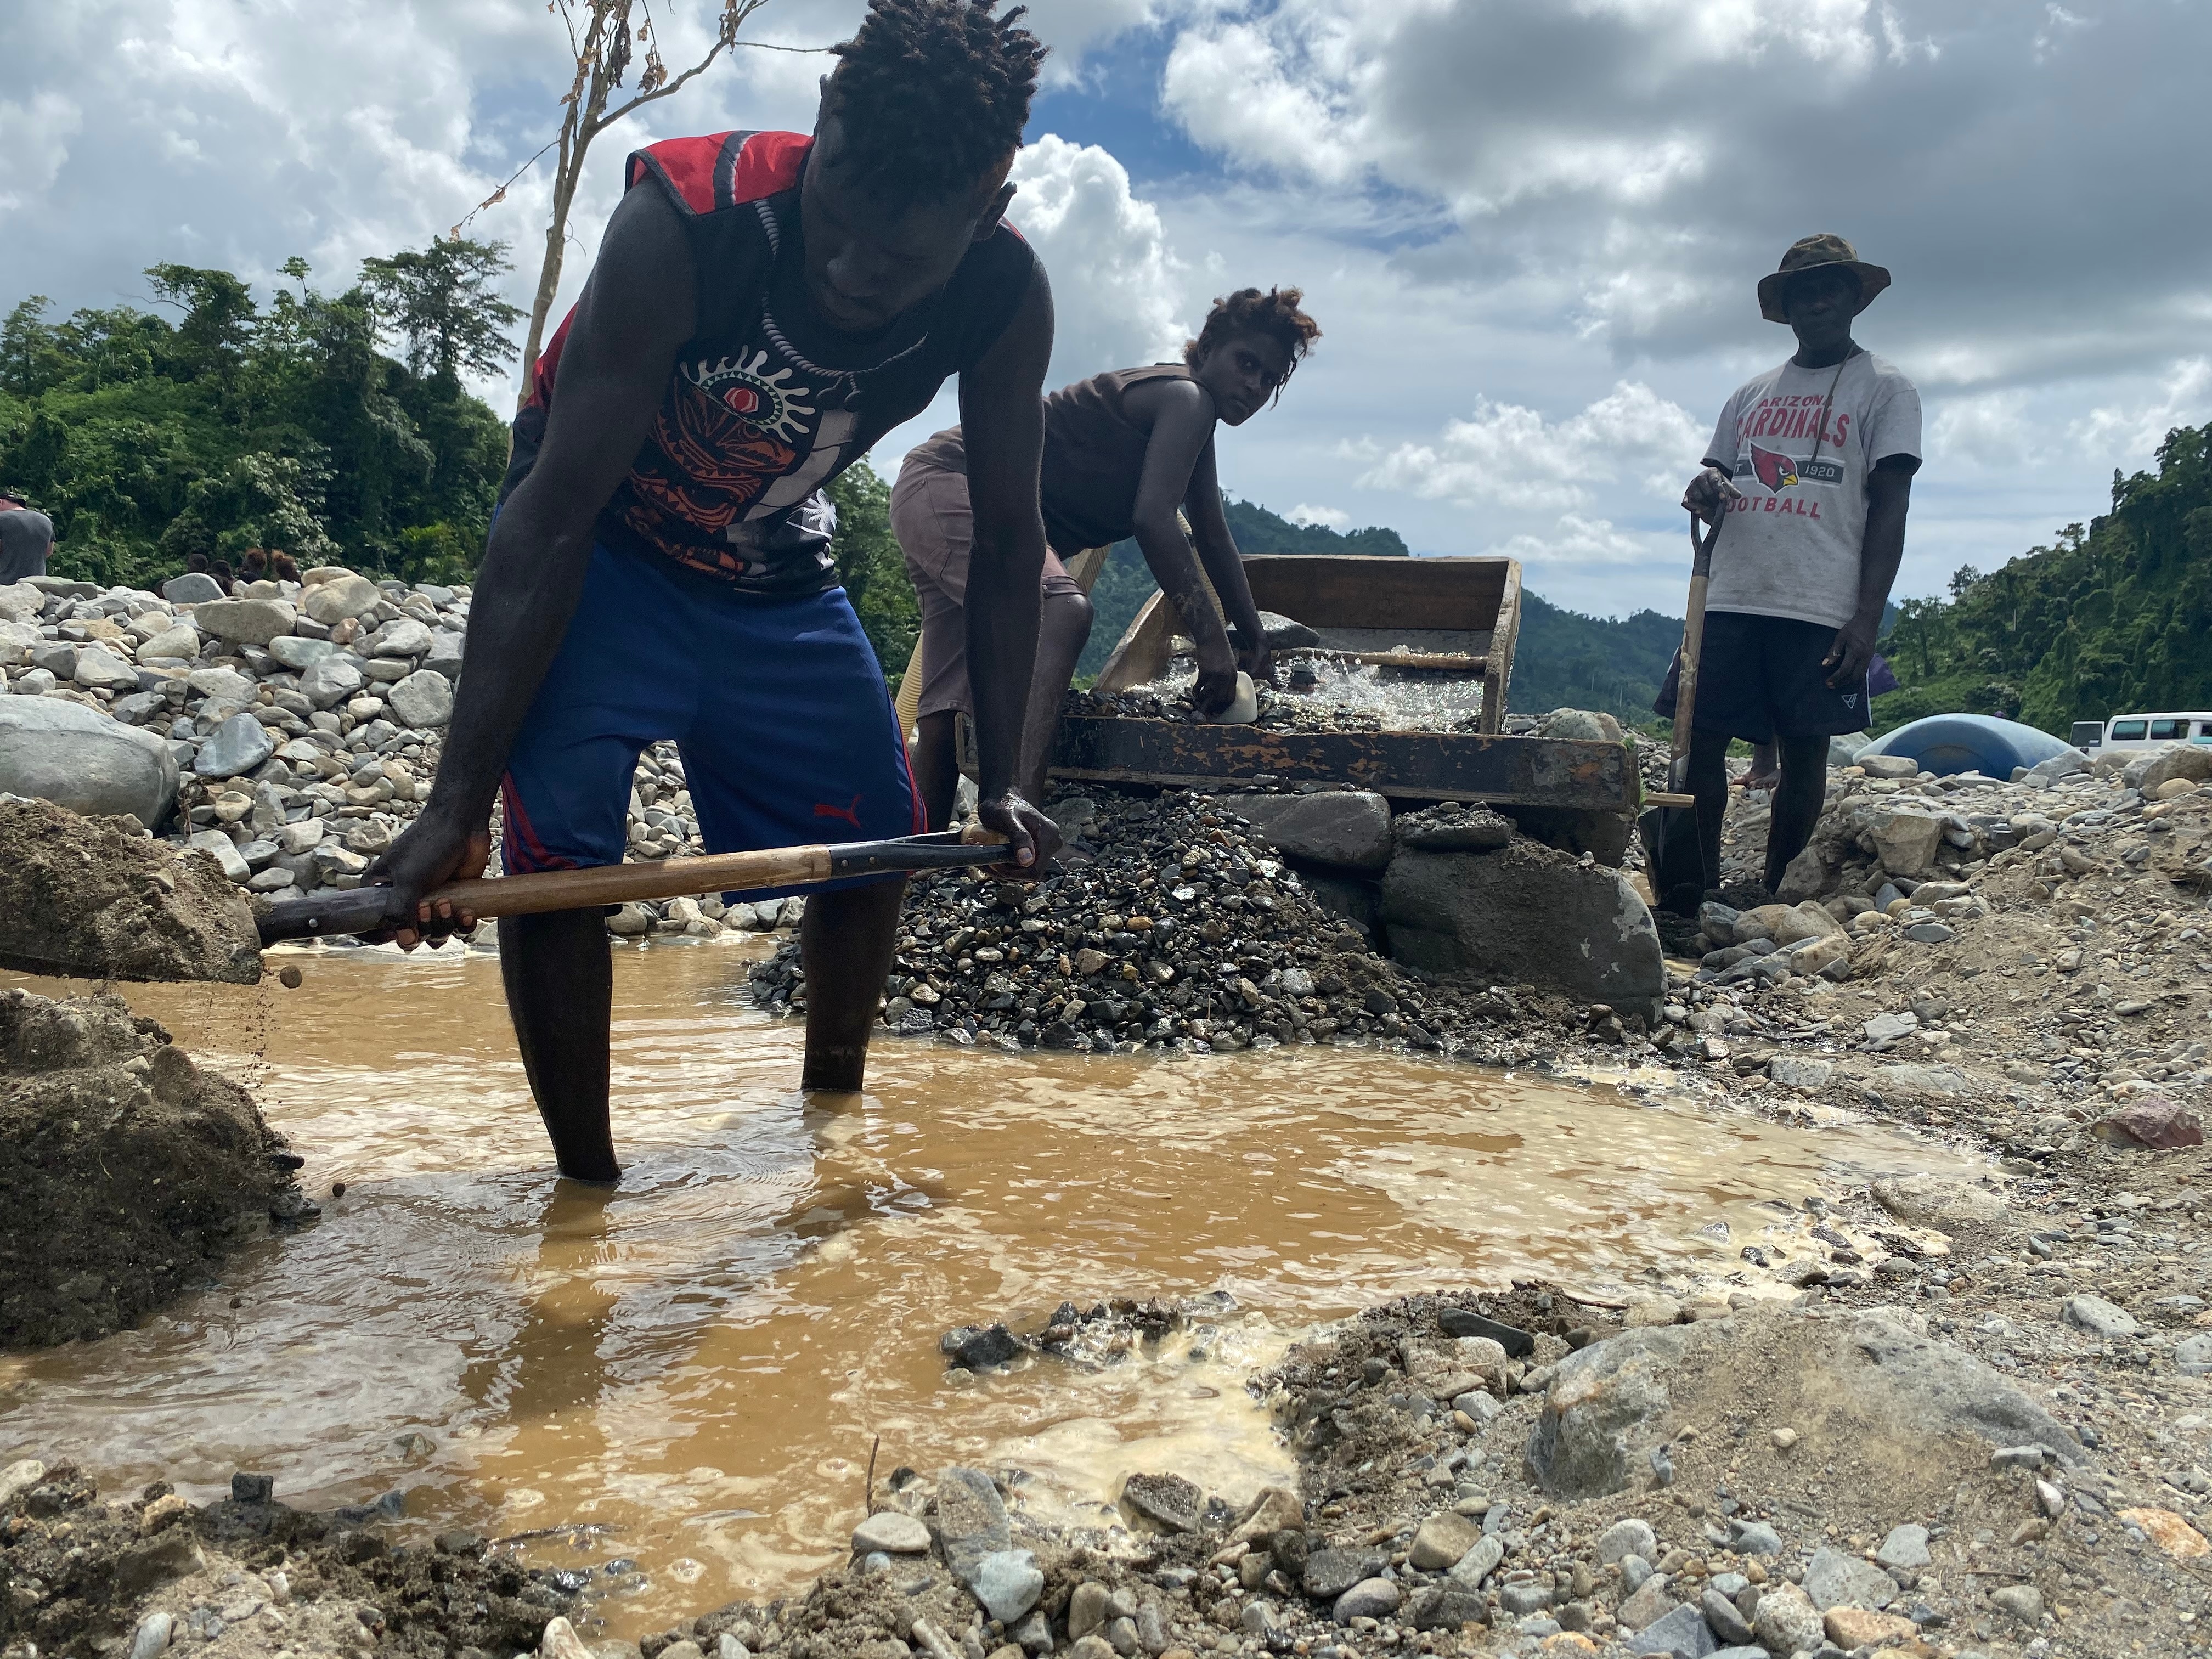 Bougainville's rivers and lands were devastated by mining waste.